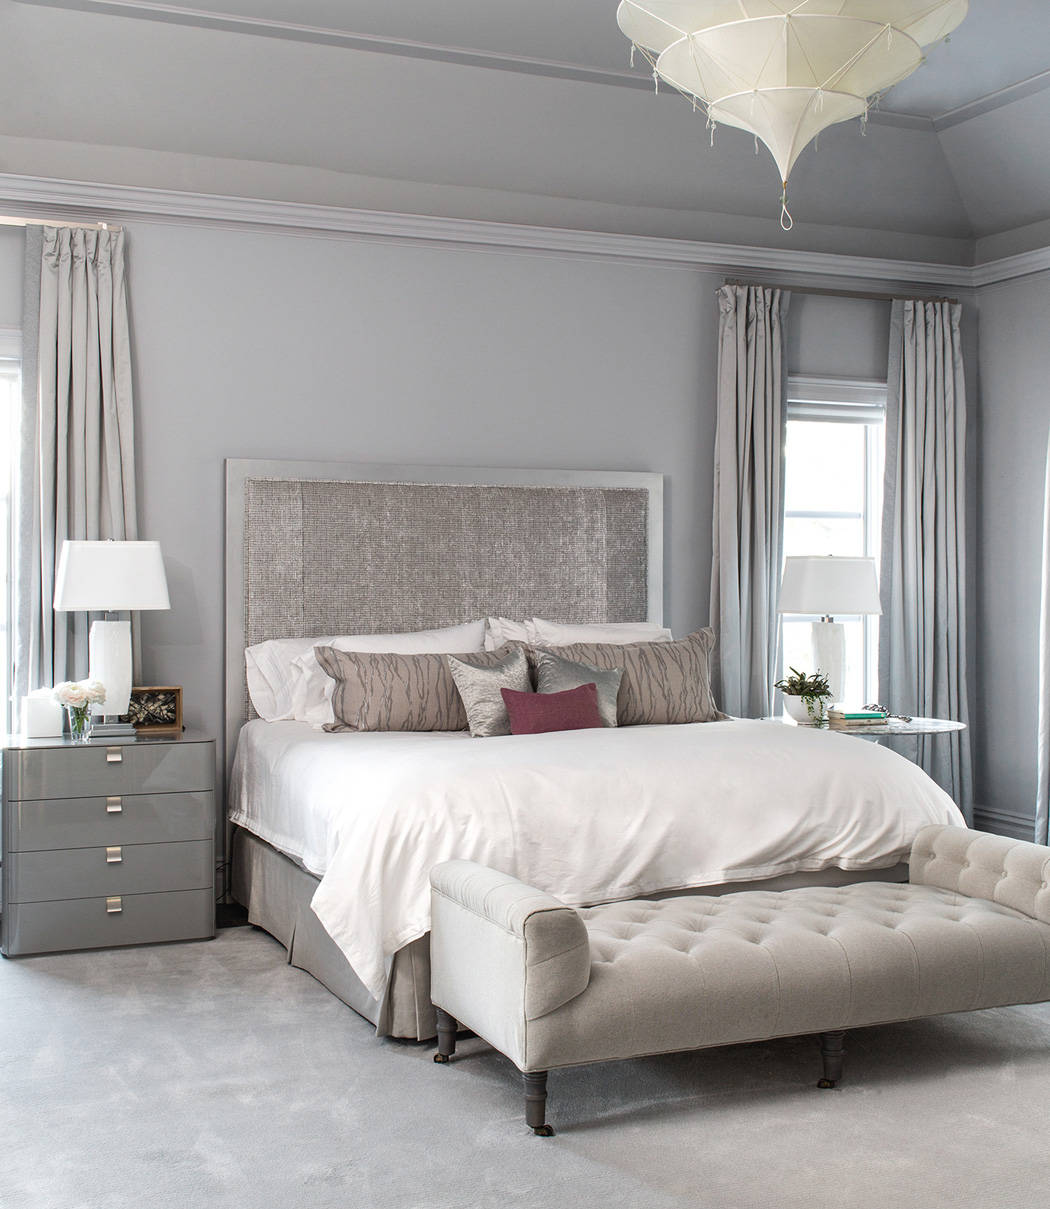 Curtains With Gray Walls Ideas Photos, Light Grey Curtains Bedroom